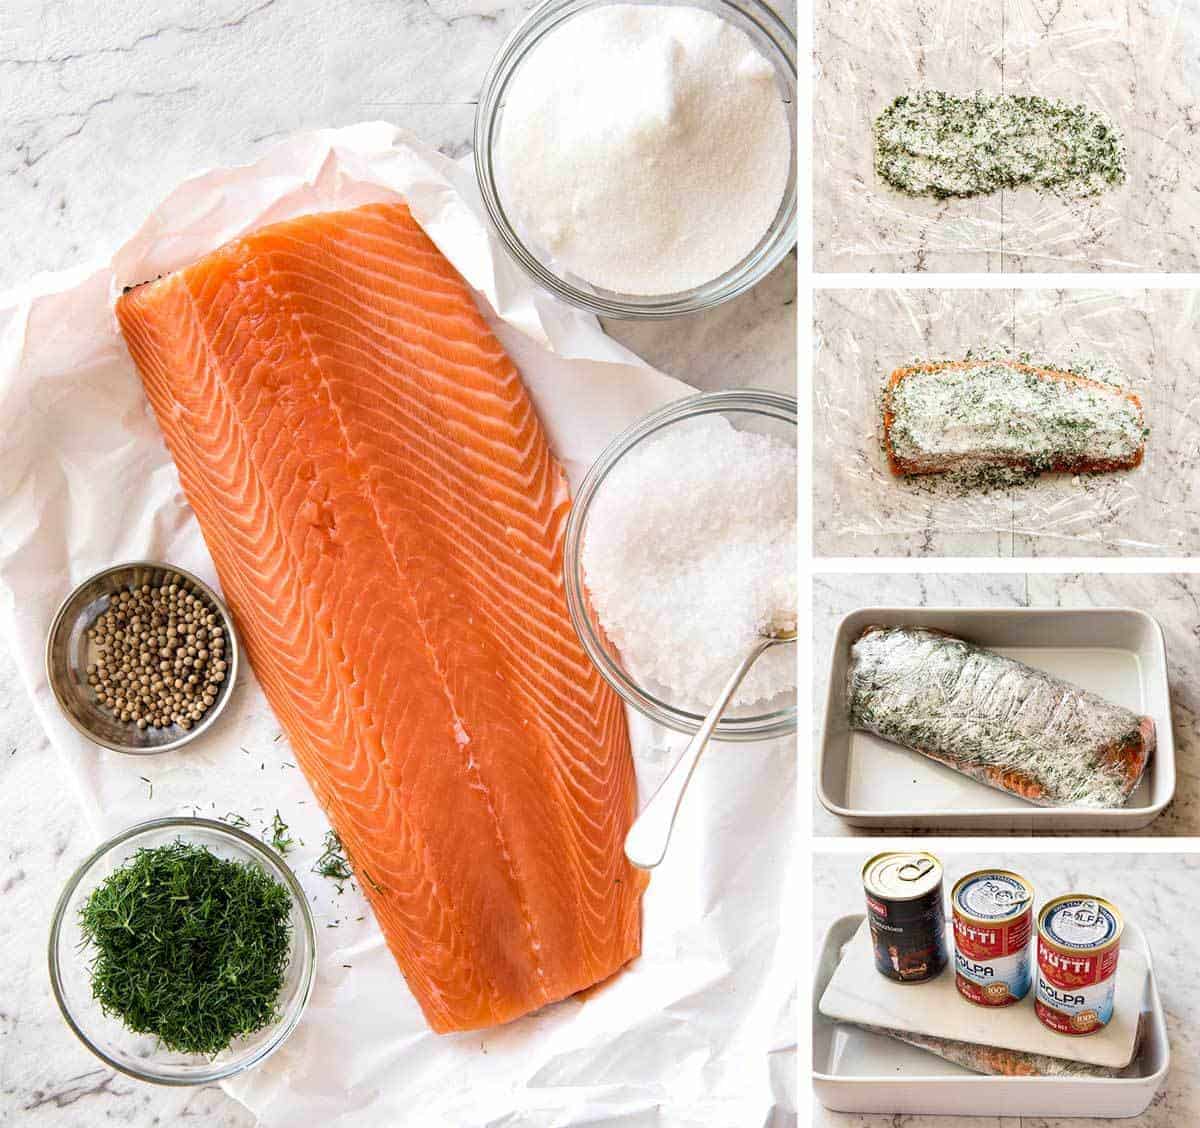 Homemade Cured Salmon Gravlax is arguably the easiest luxury food to make at home at a fraction of the cost of store bought! recipetineats.com